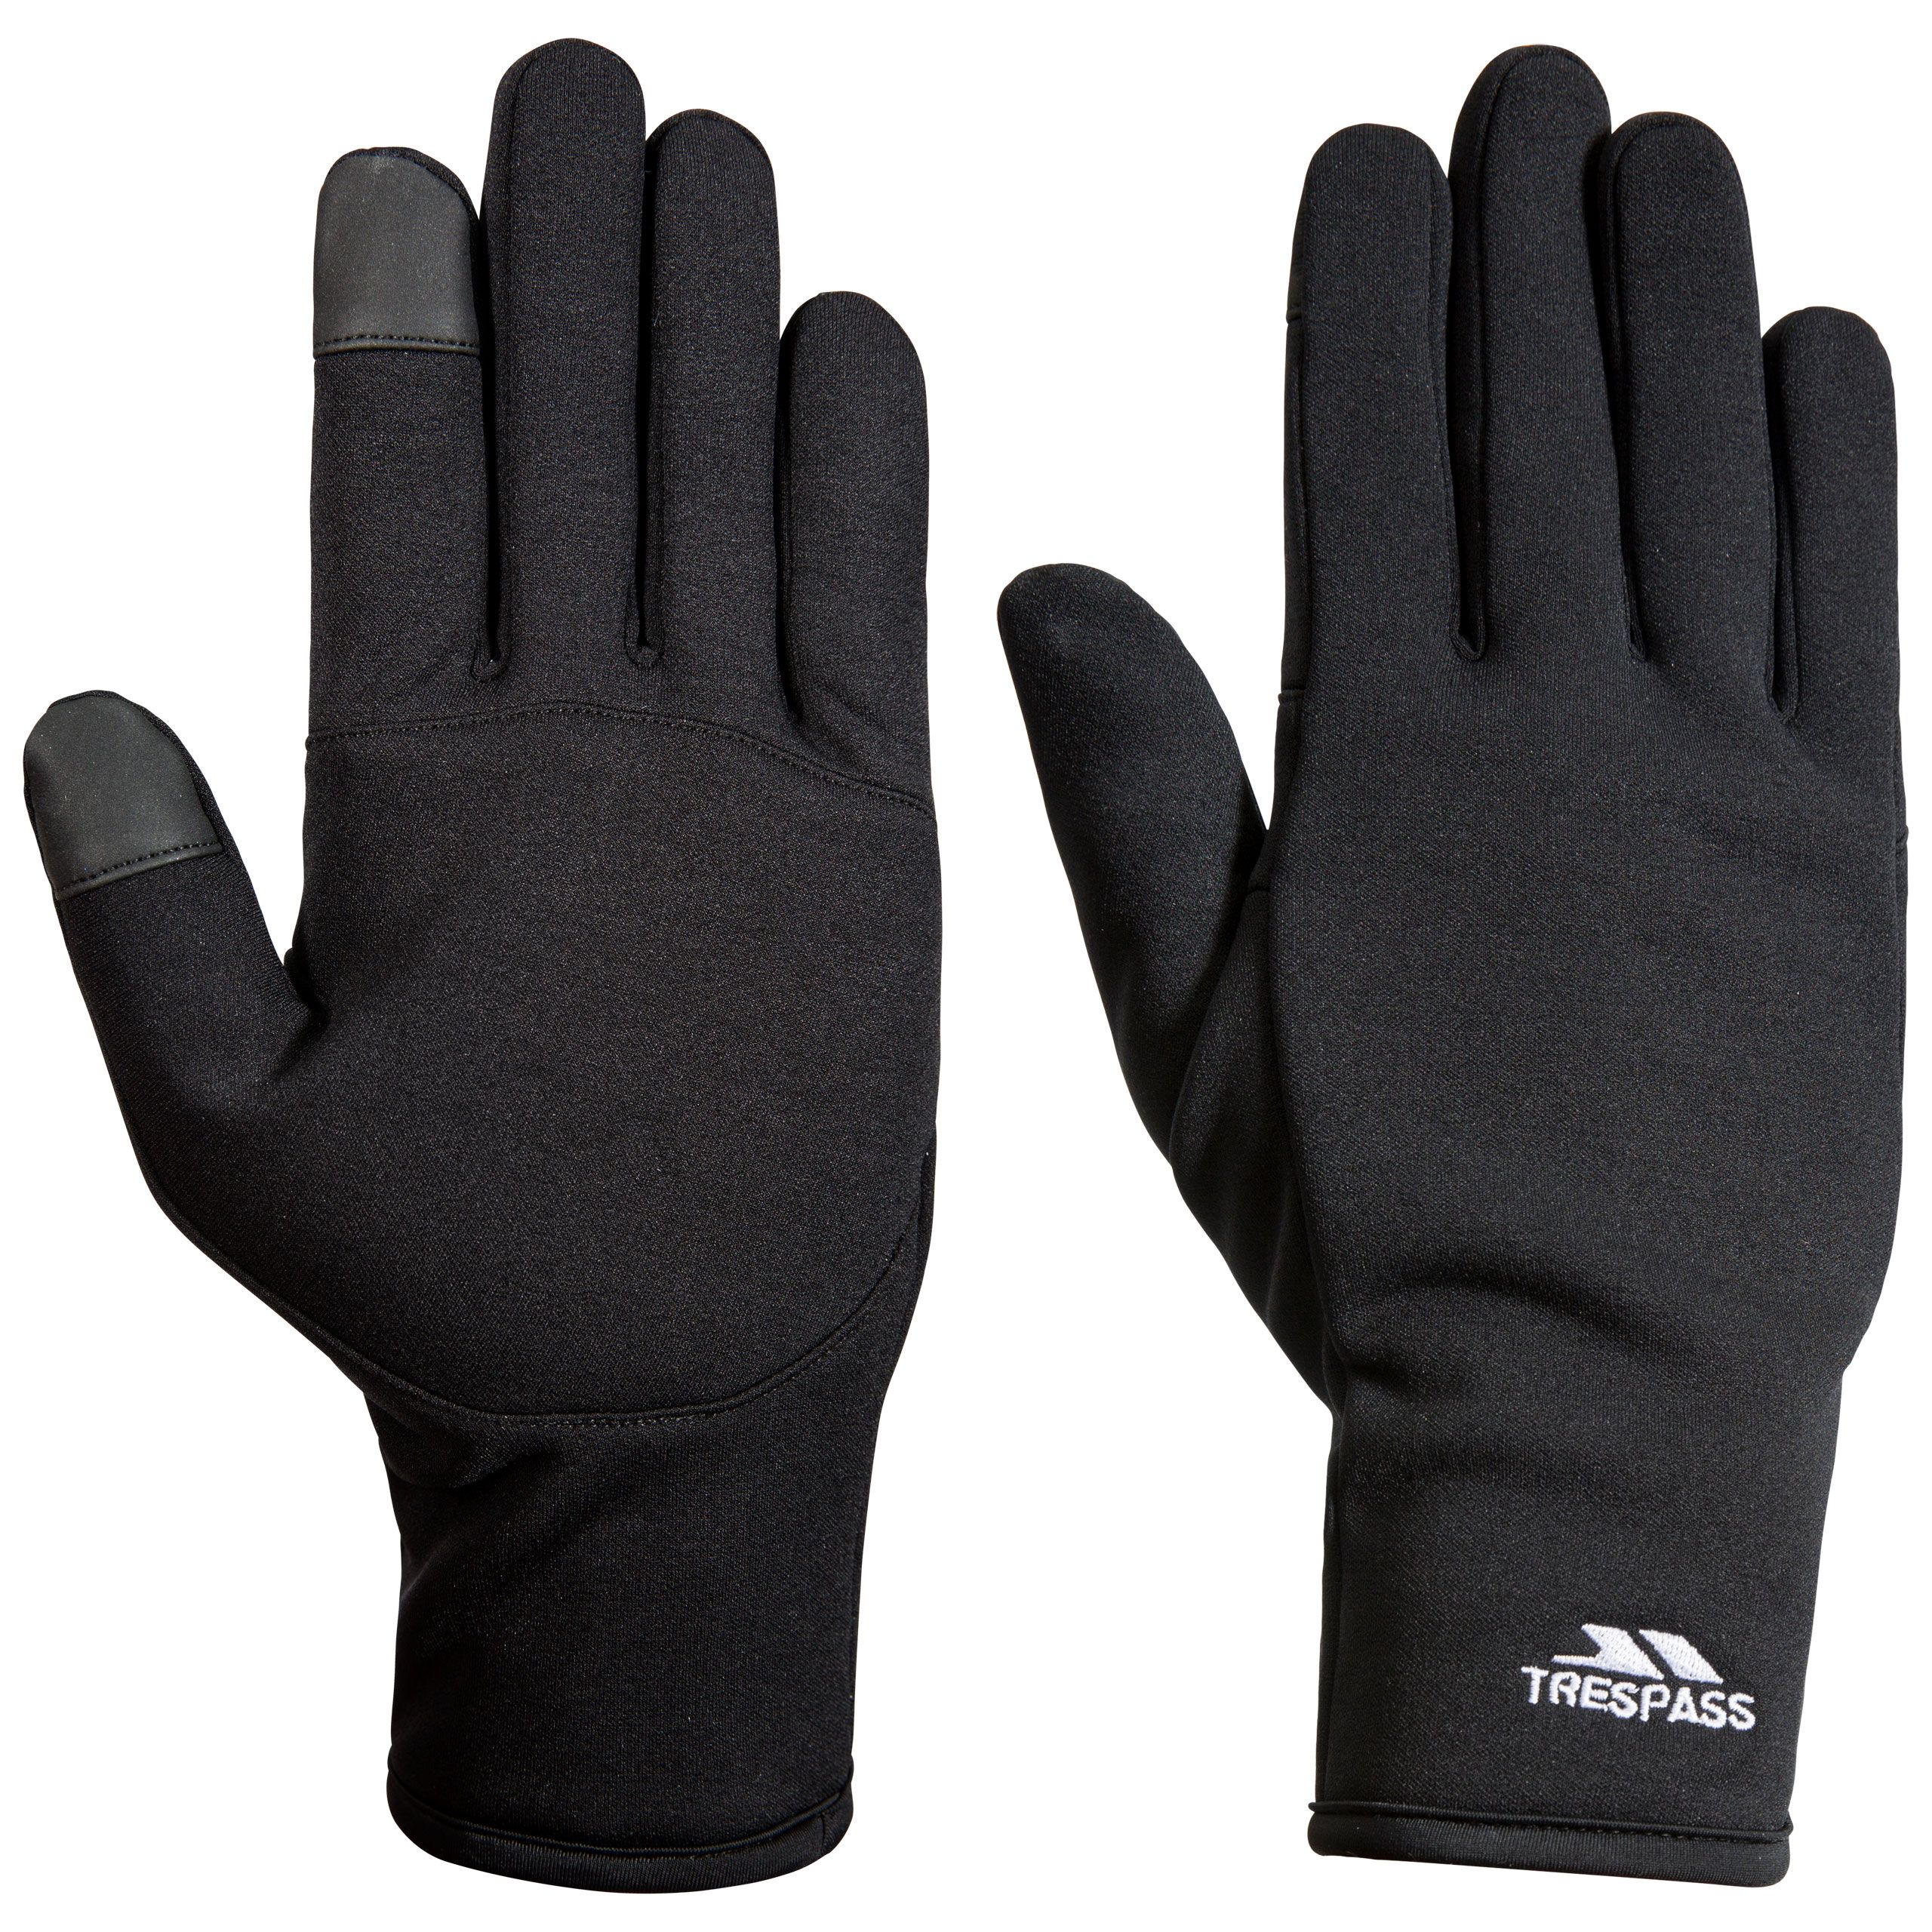 Poliner Adults Gloves With Touch Screen Fingertips